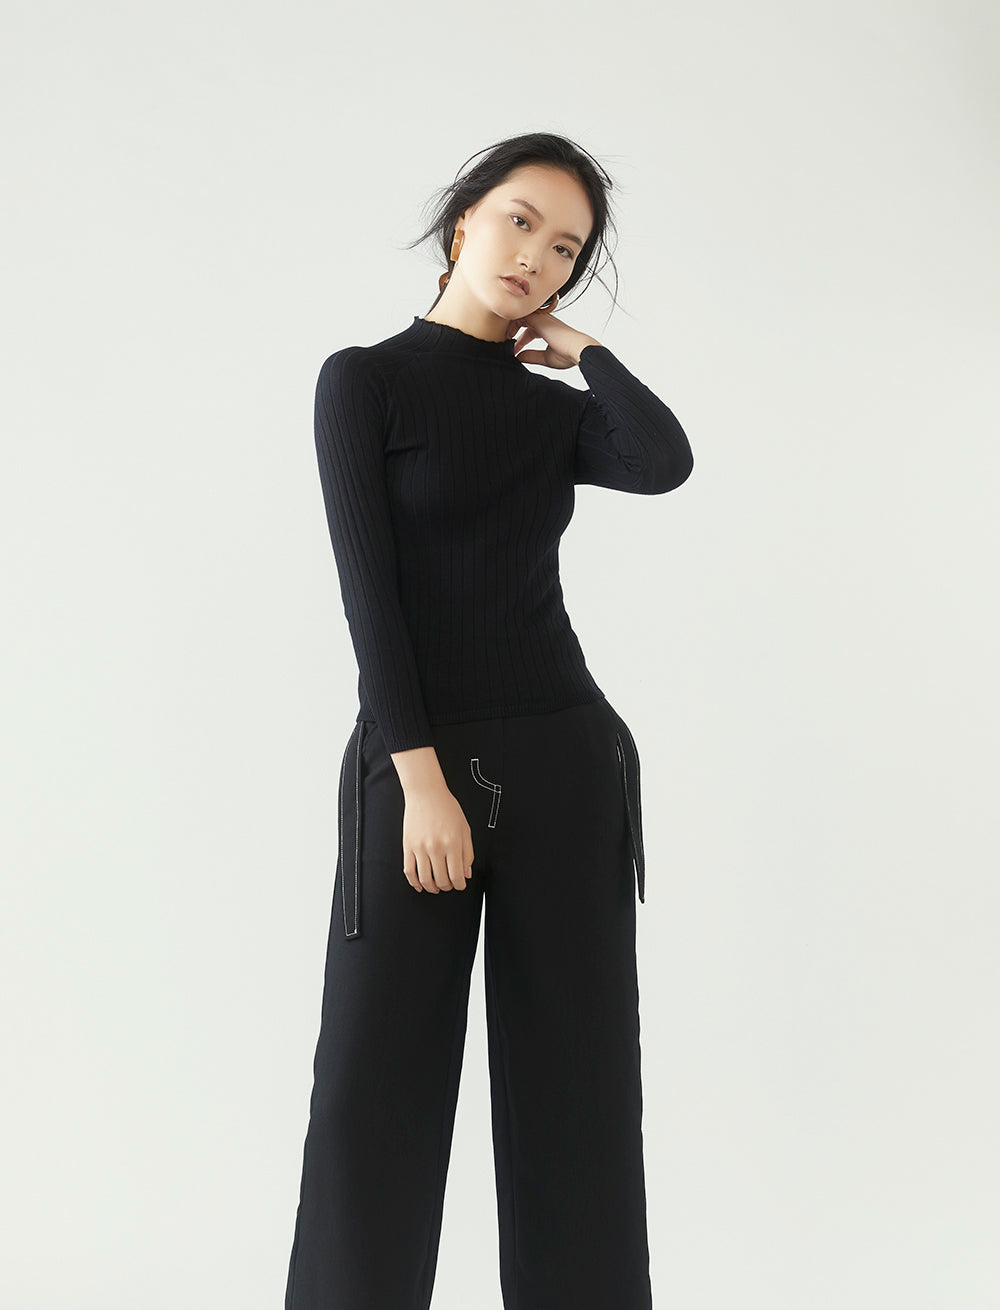 r y e  Modest Women Ribbed Knit Long Sleeve Top in Black with ribbed details and high neck collar made from 95% Viscose and 5% Spandex side view